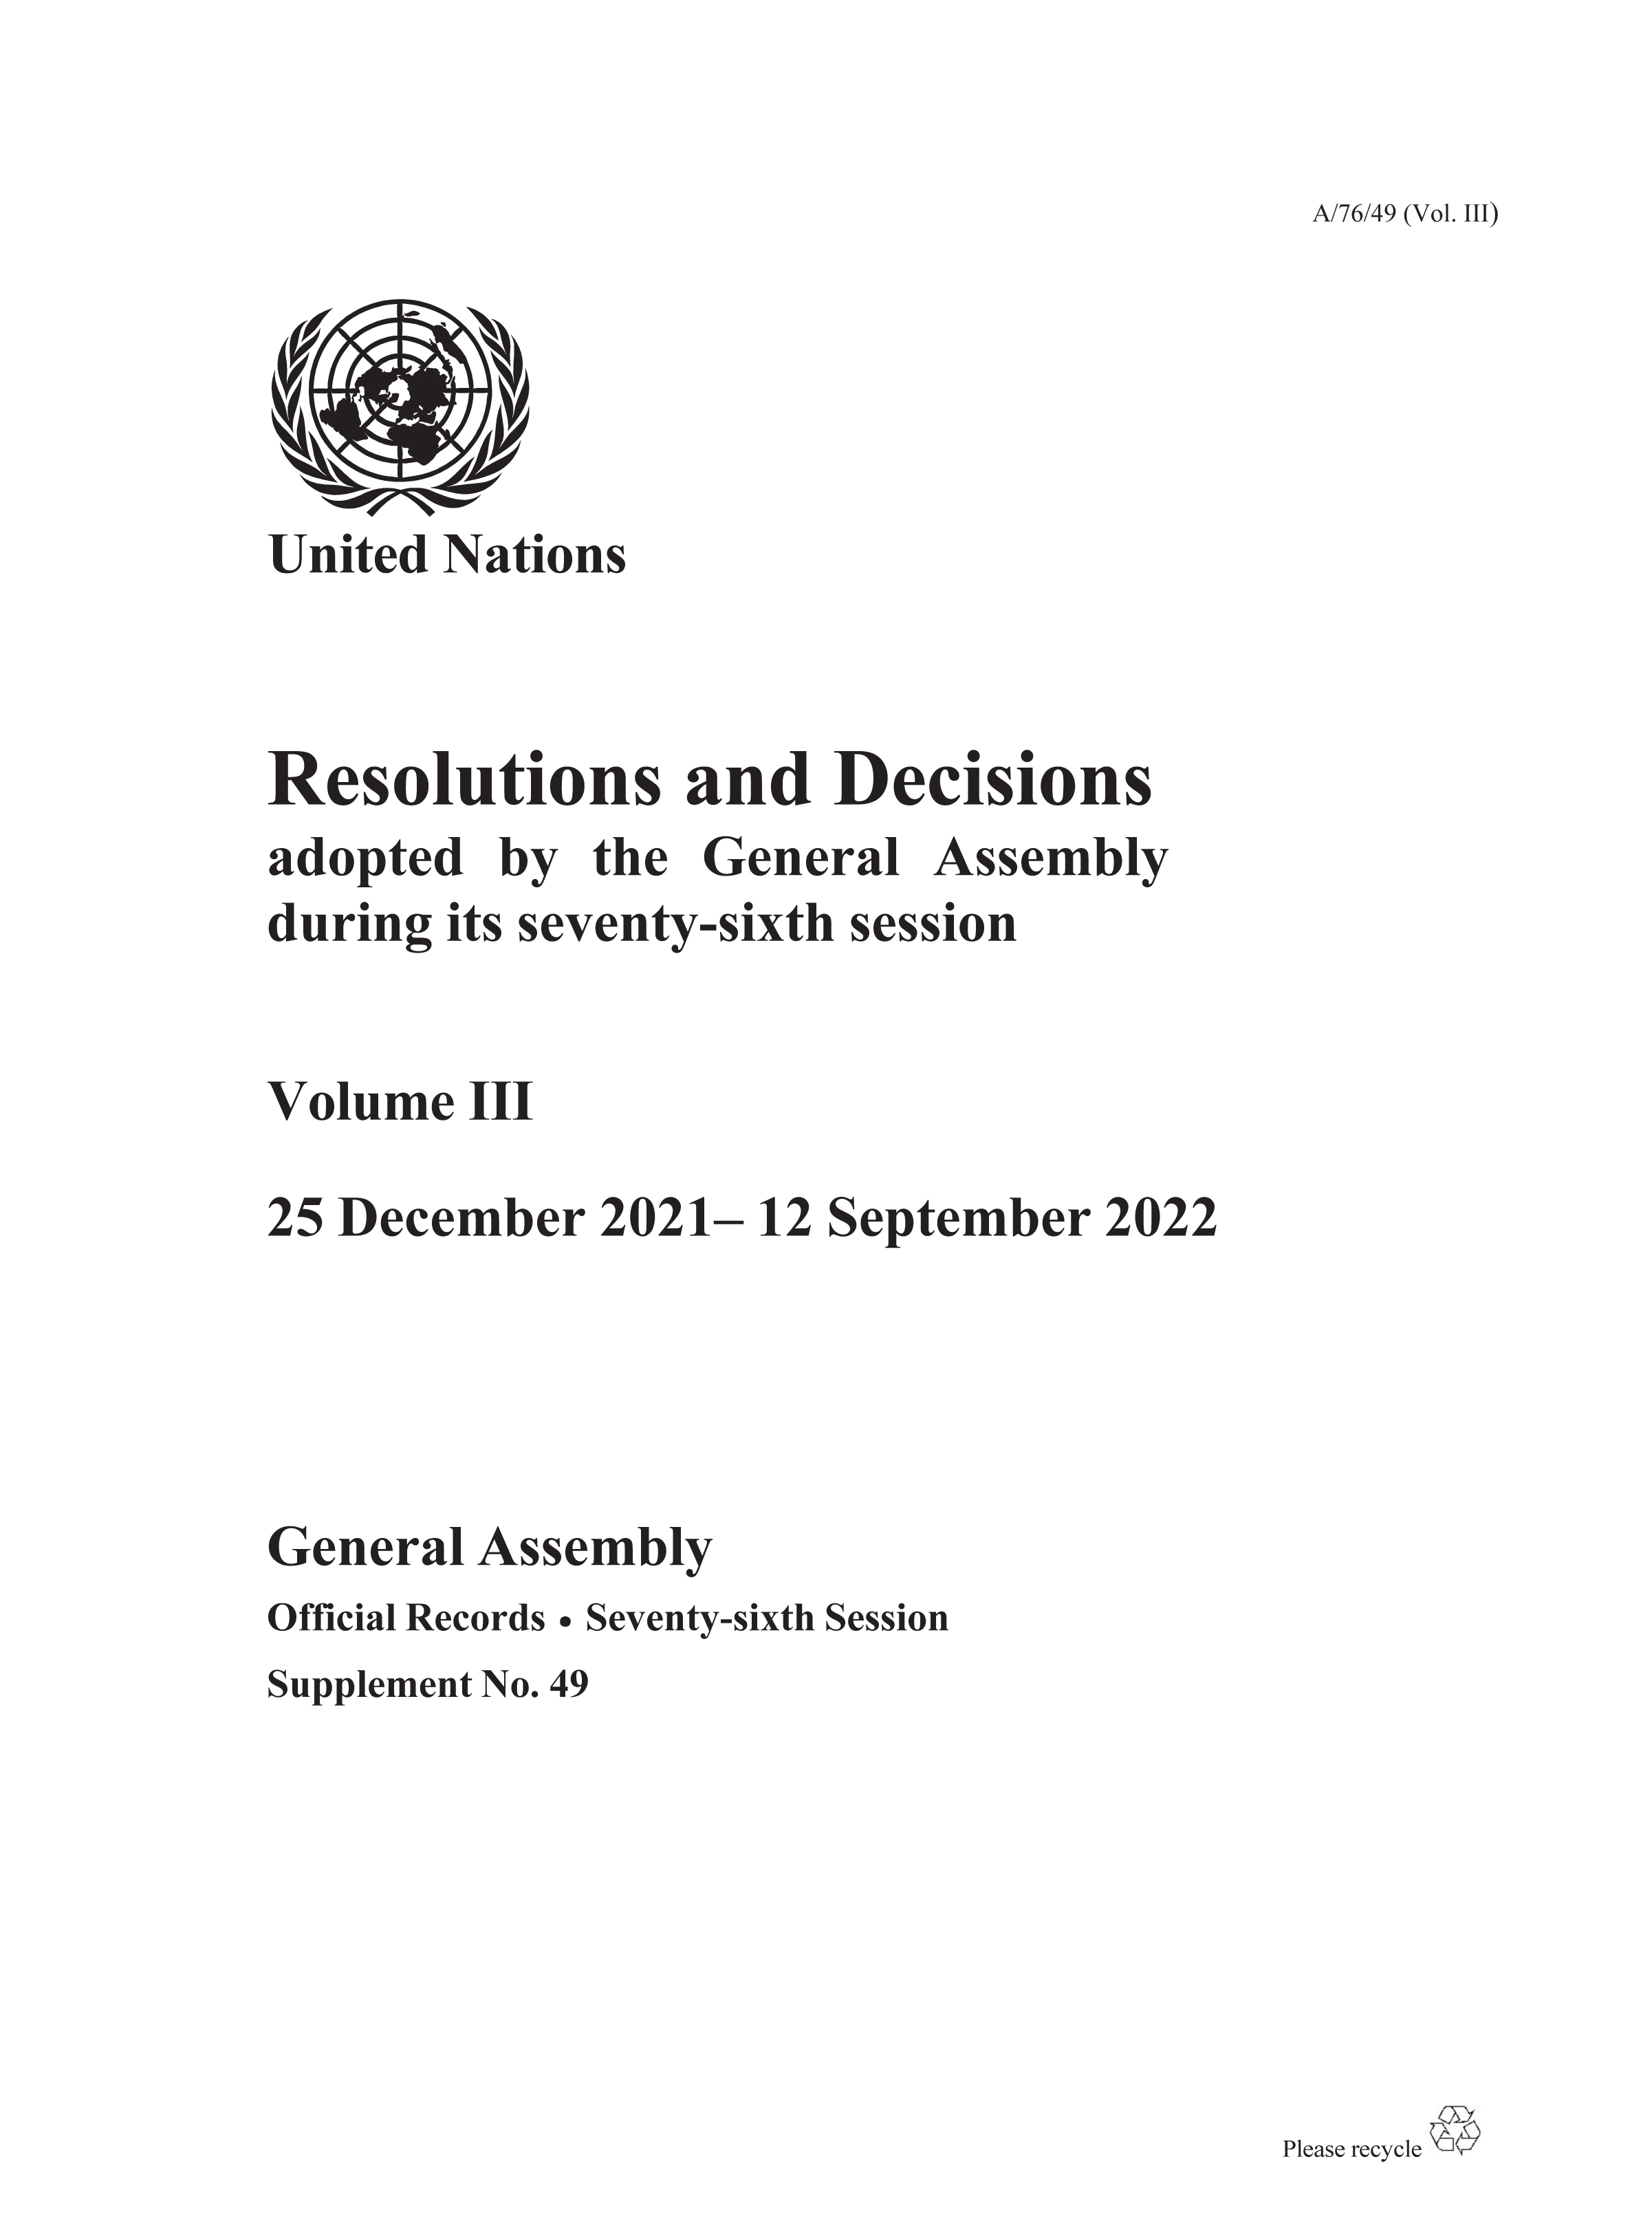 image of Resolutions and Decisions Adopted by the General Assembly During Its Seventy-sixth Session: Volume III